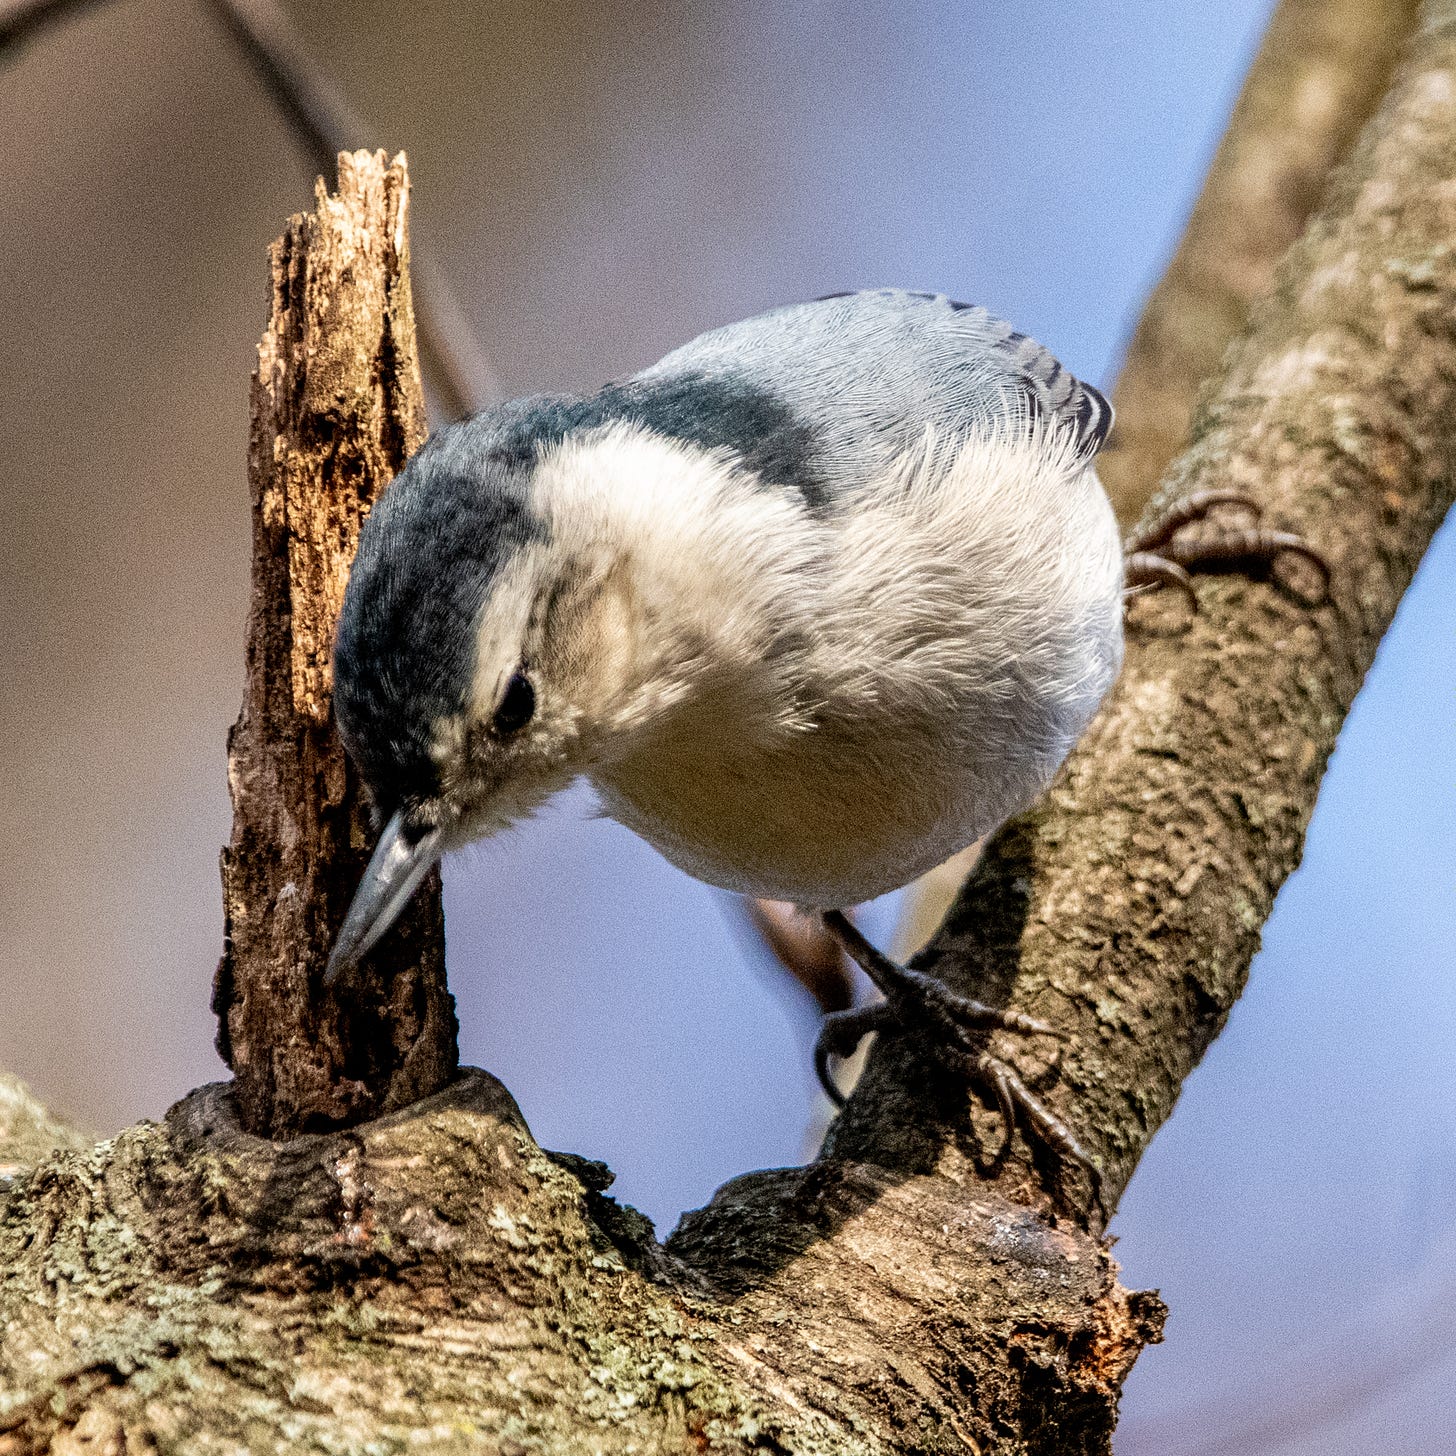 White-breasted nuthatch, in close-up, standing on a diagonal branch and inspecting something below it